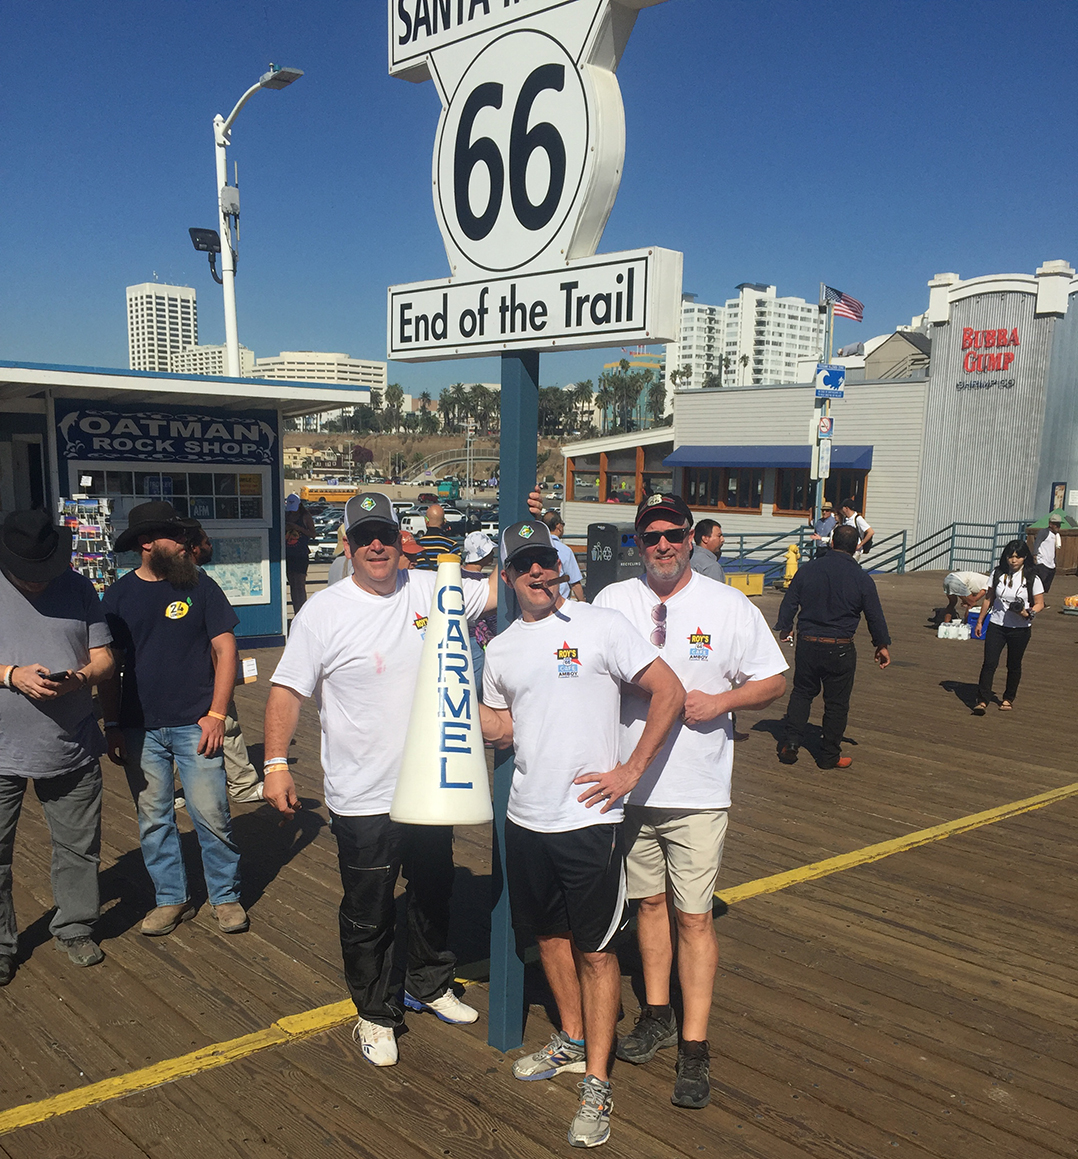 One for the road: Class of ’84 grads travel Route 66 to fundraise for reunion